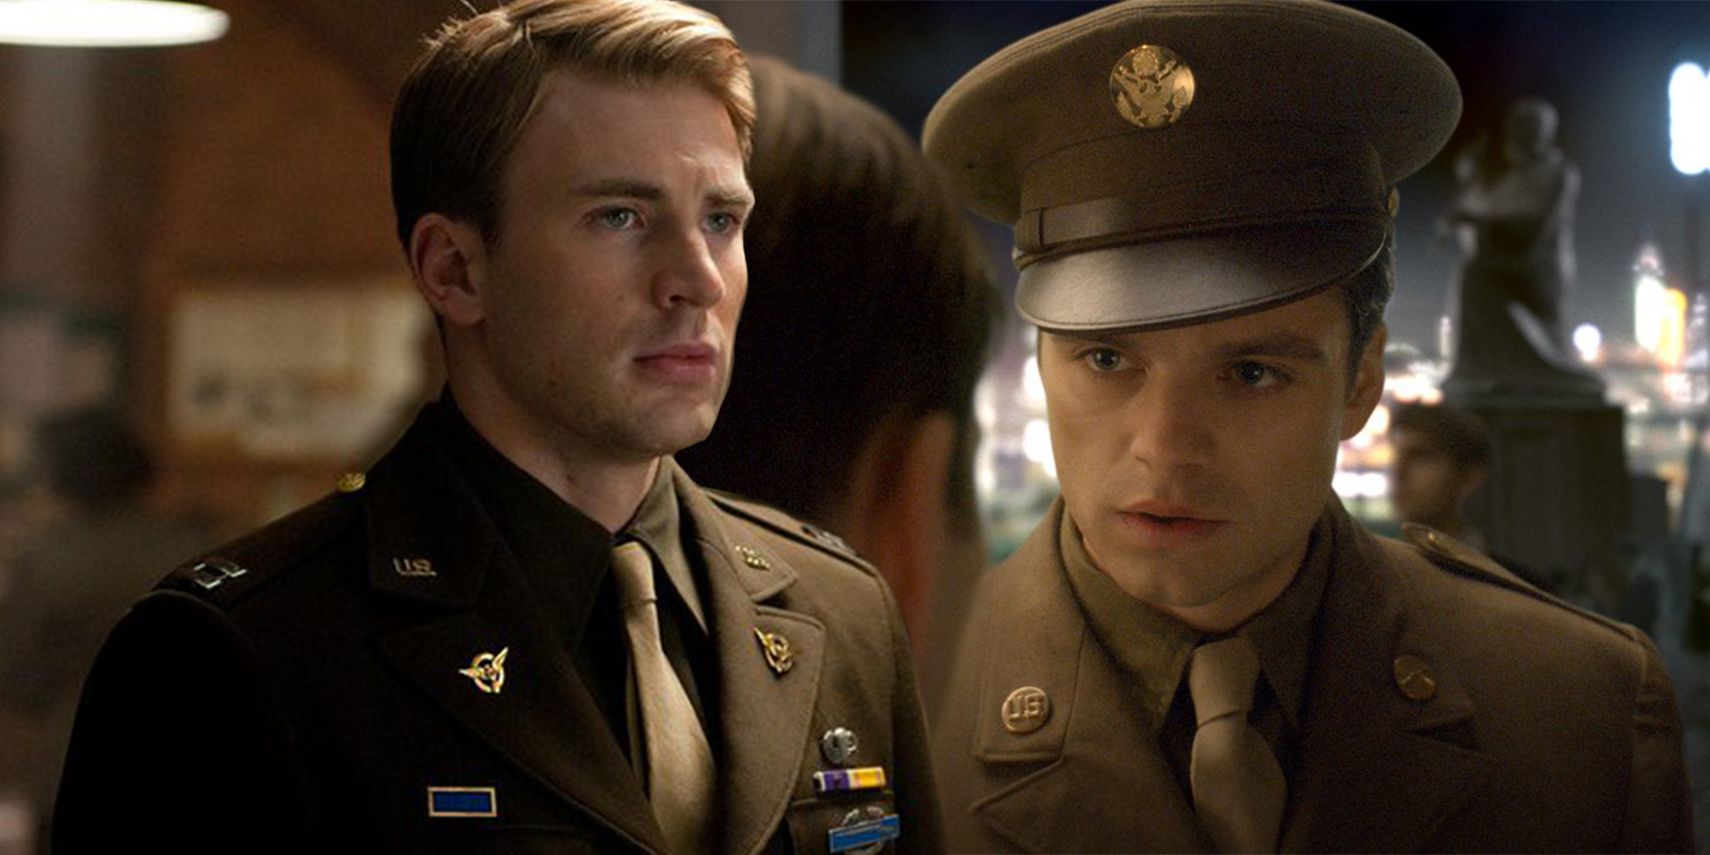 Steve and Bucky in their army uniforms in the 1940s